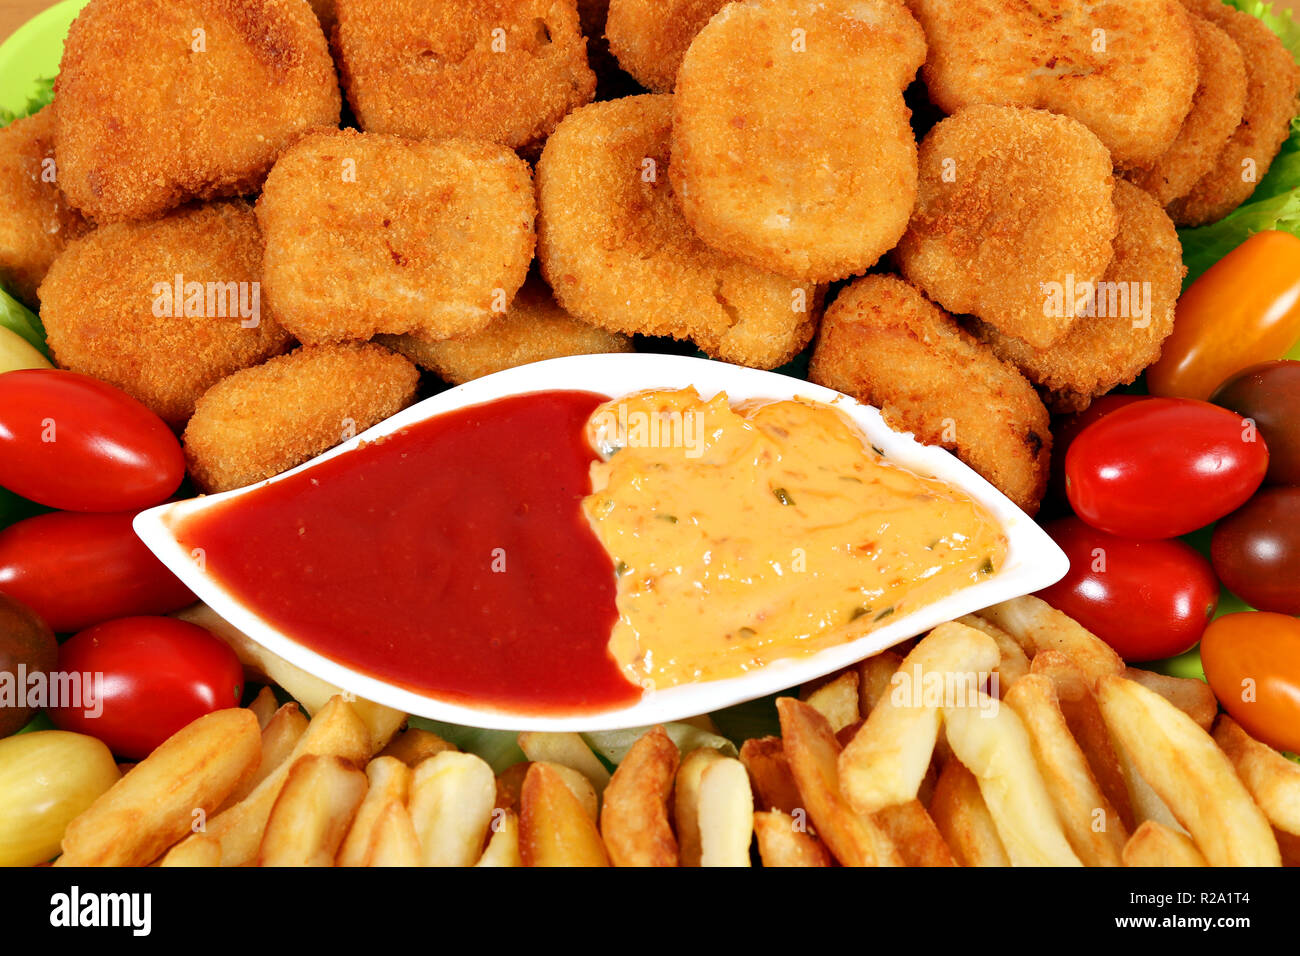 tasty chicken nuggets and french fries fast food Stock Photo